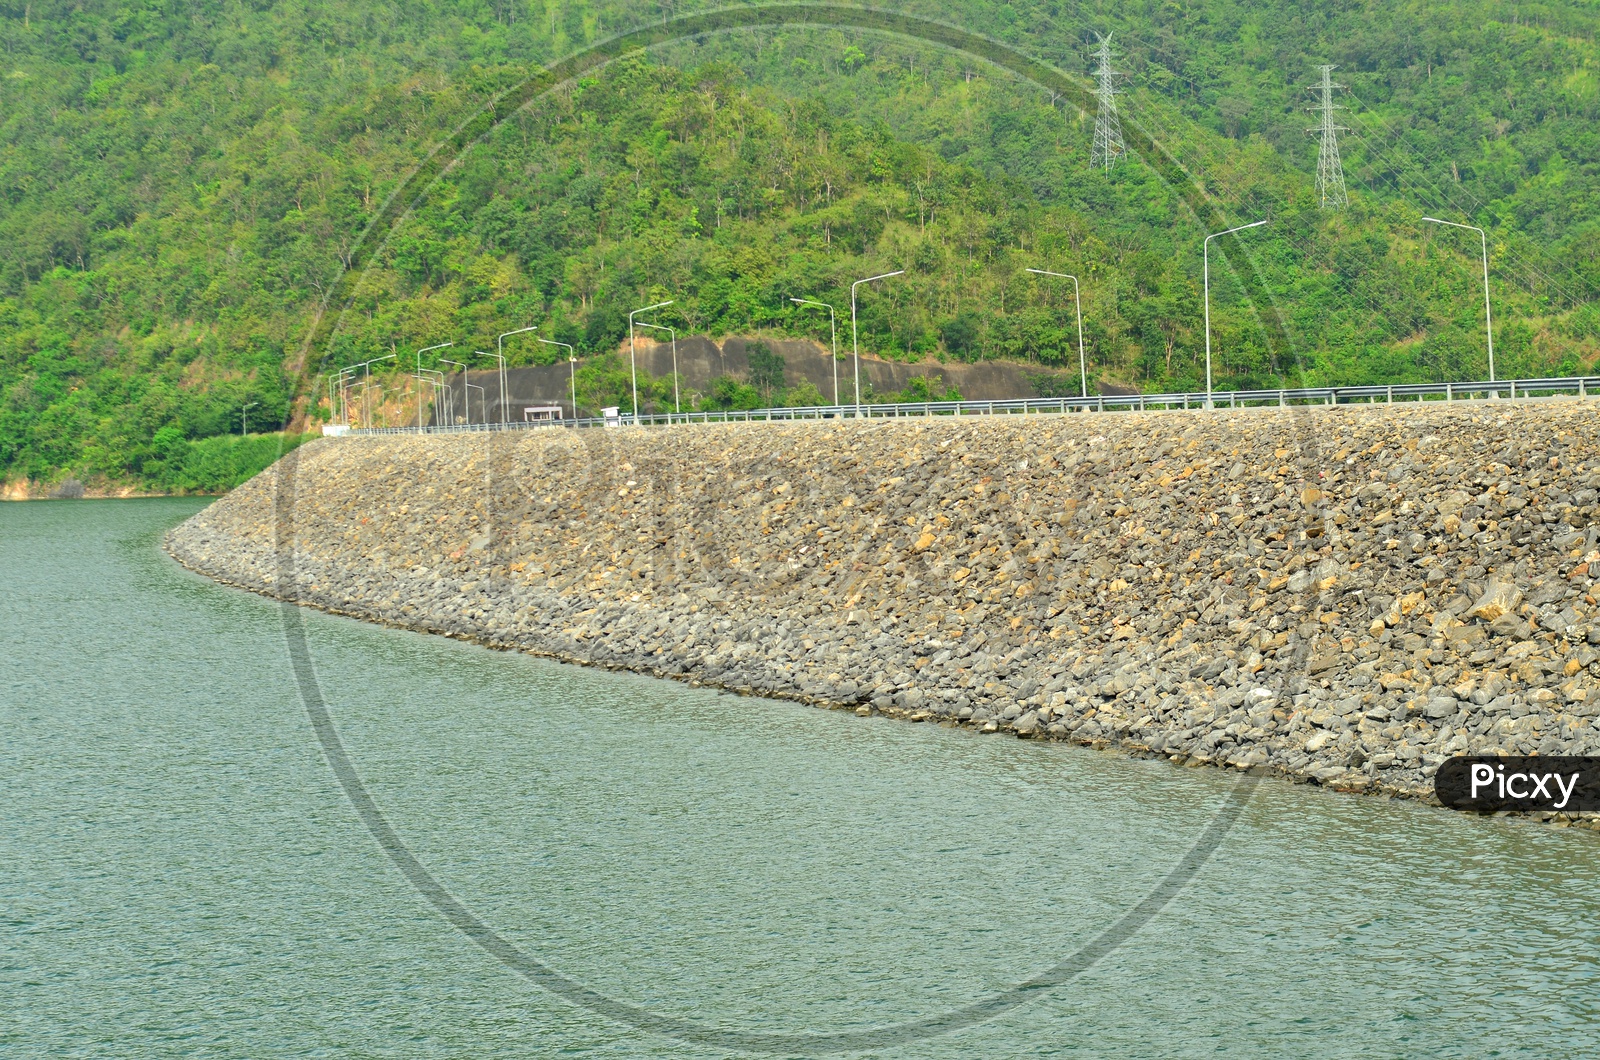 Water Storage in a Reservoir with electric hi tension poles in the background